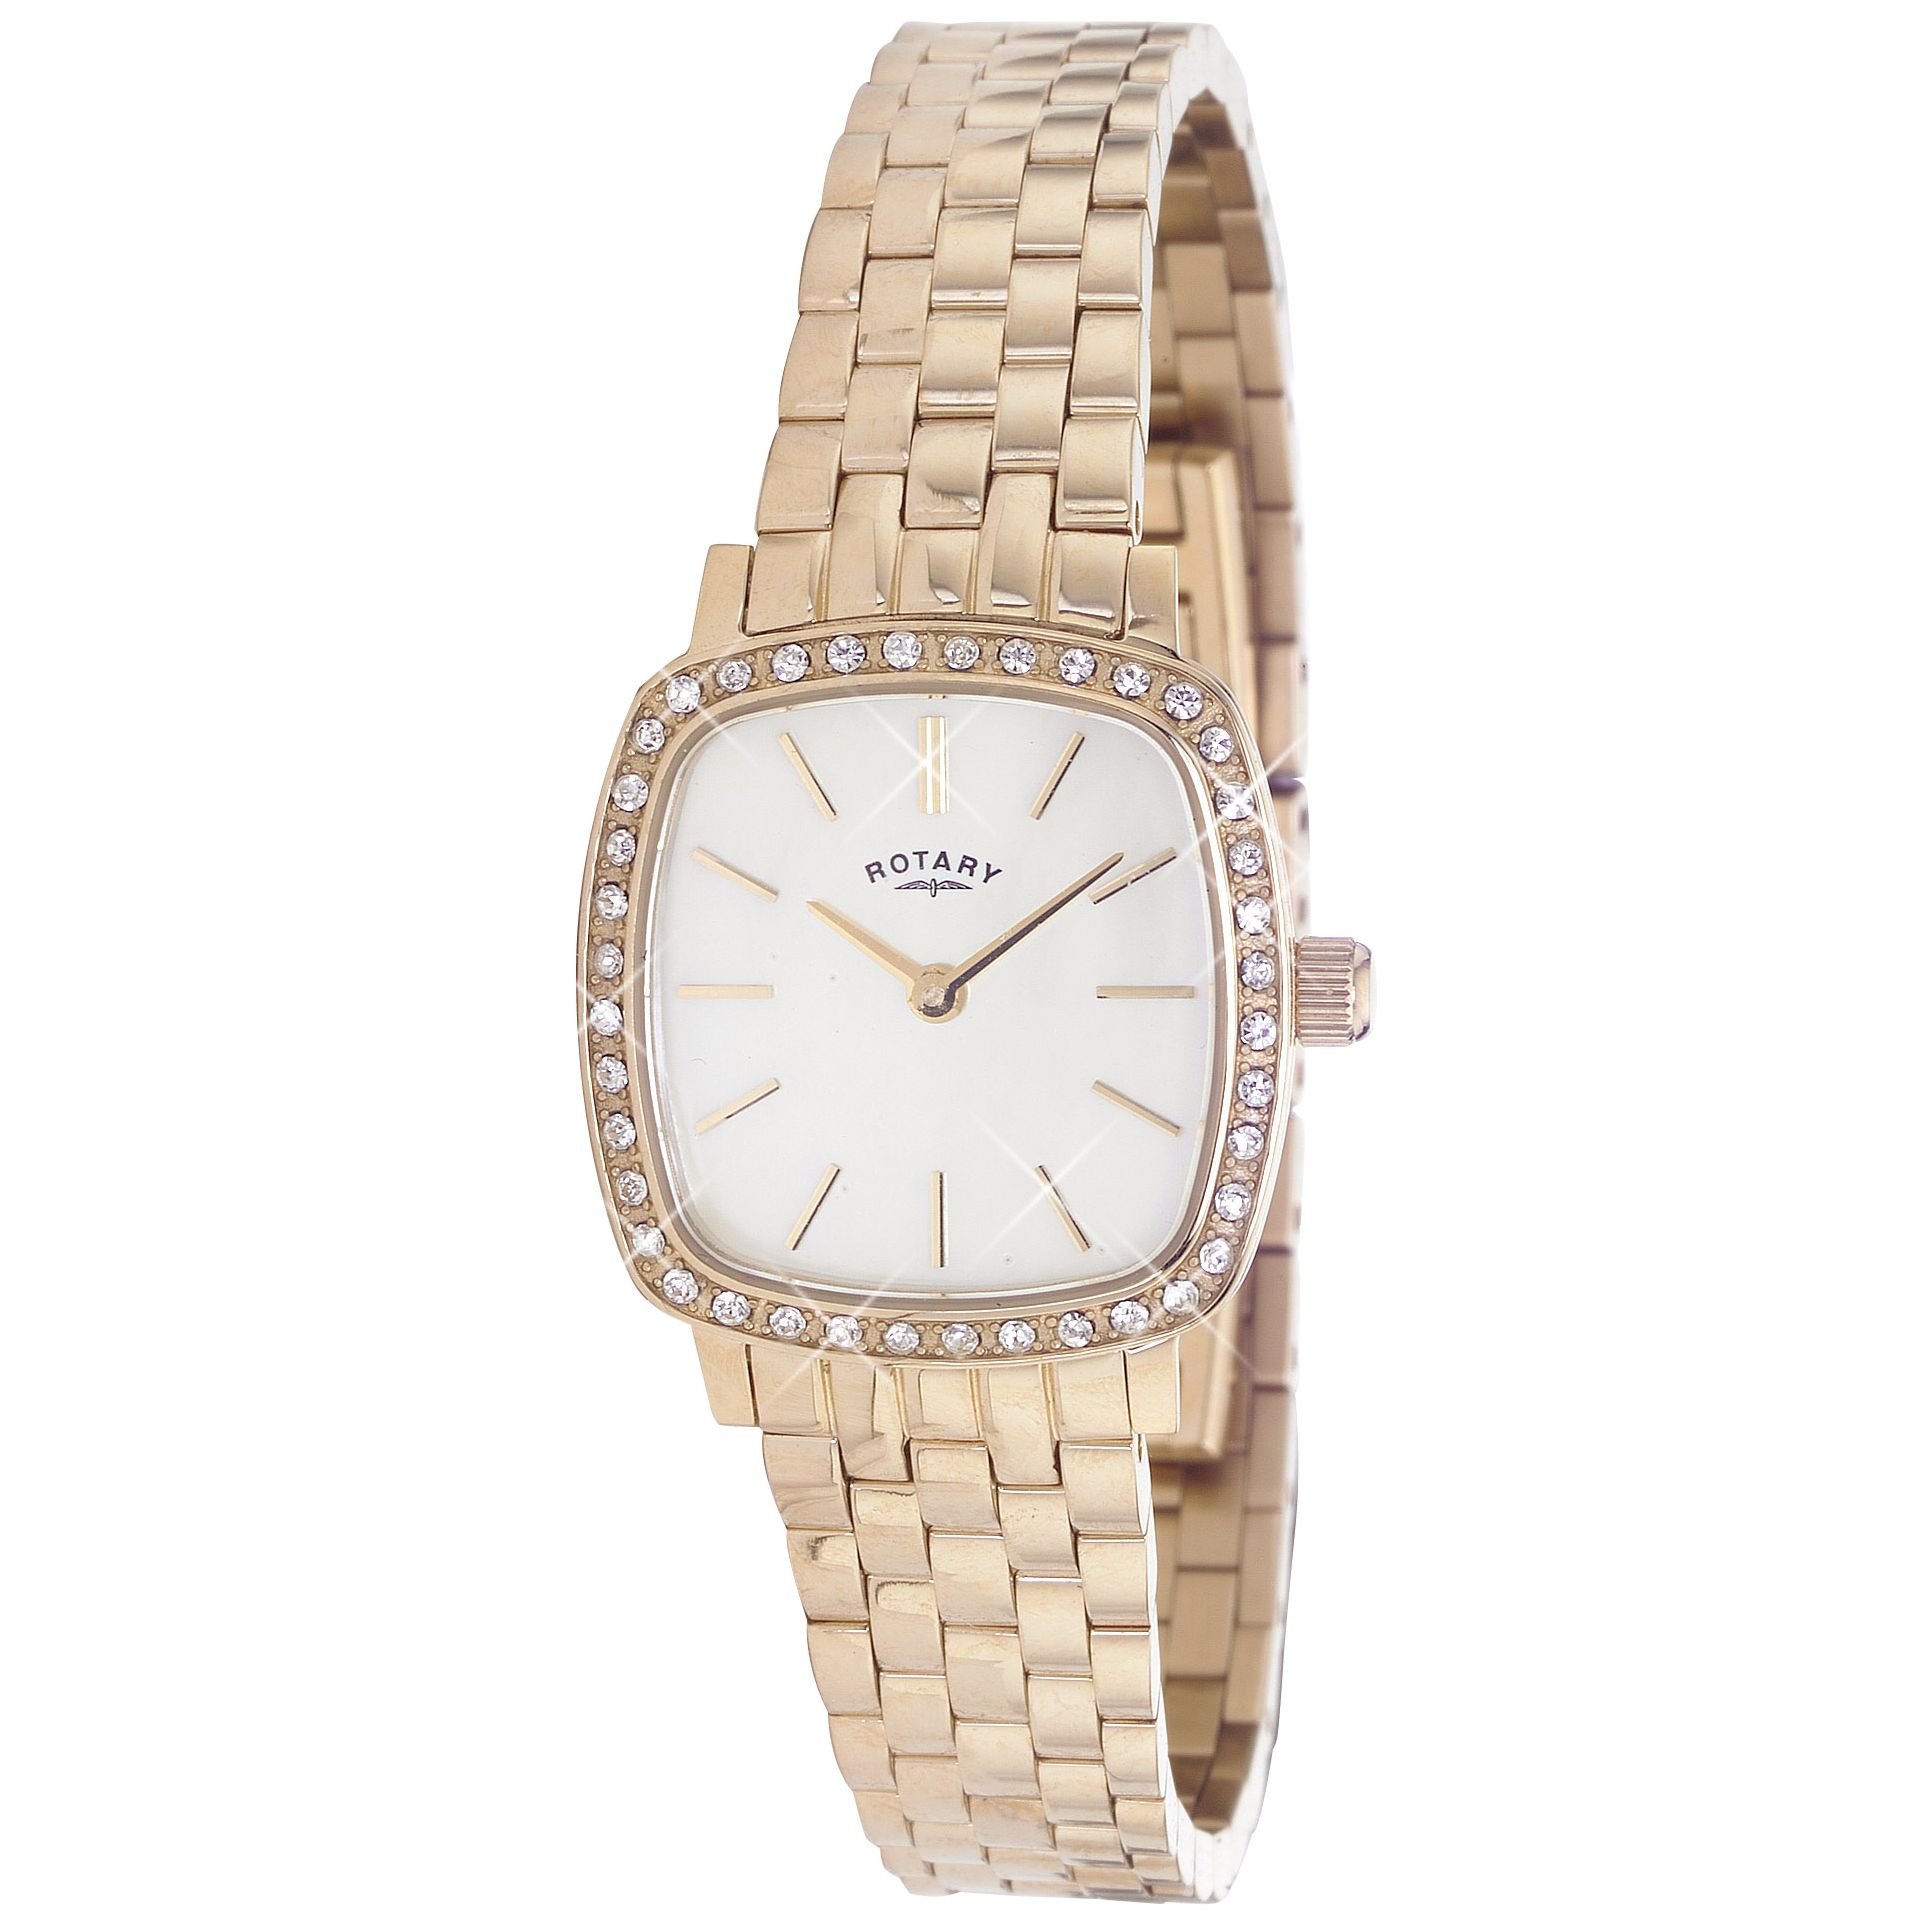 Rotary LB02405/40 Women's Gold Plated Watch at John Lewis